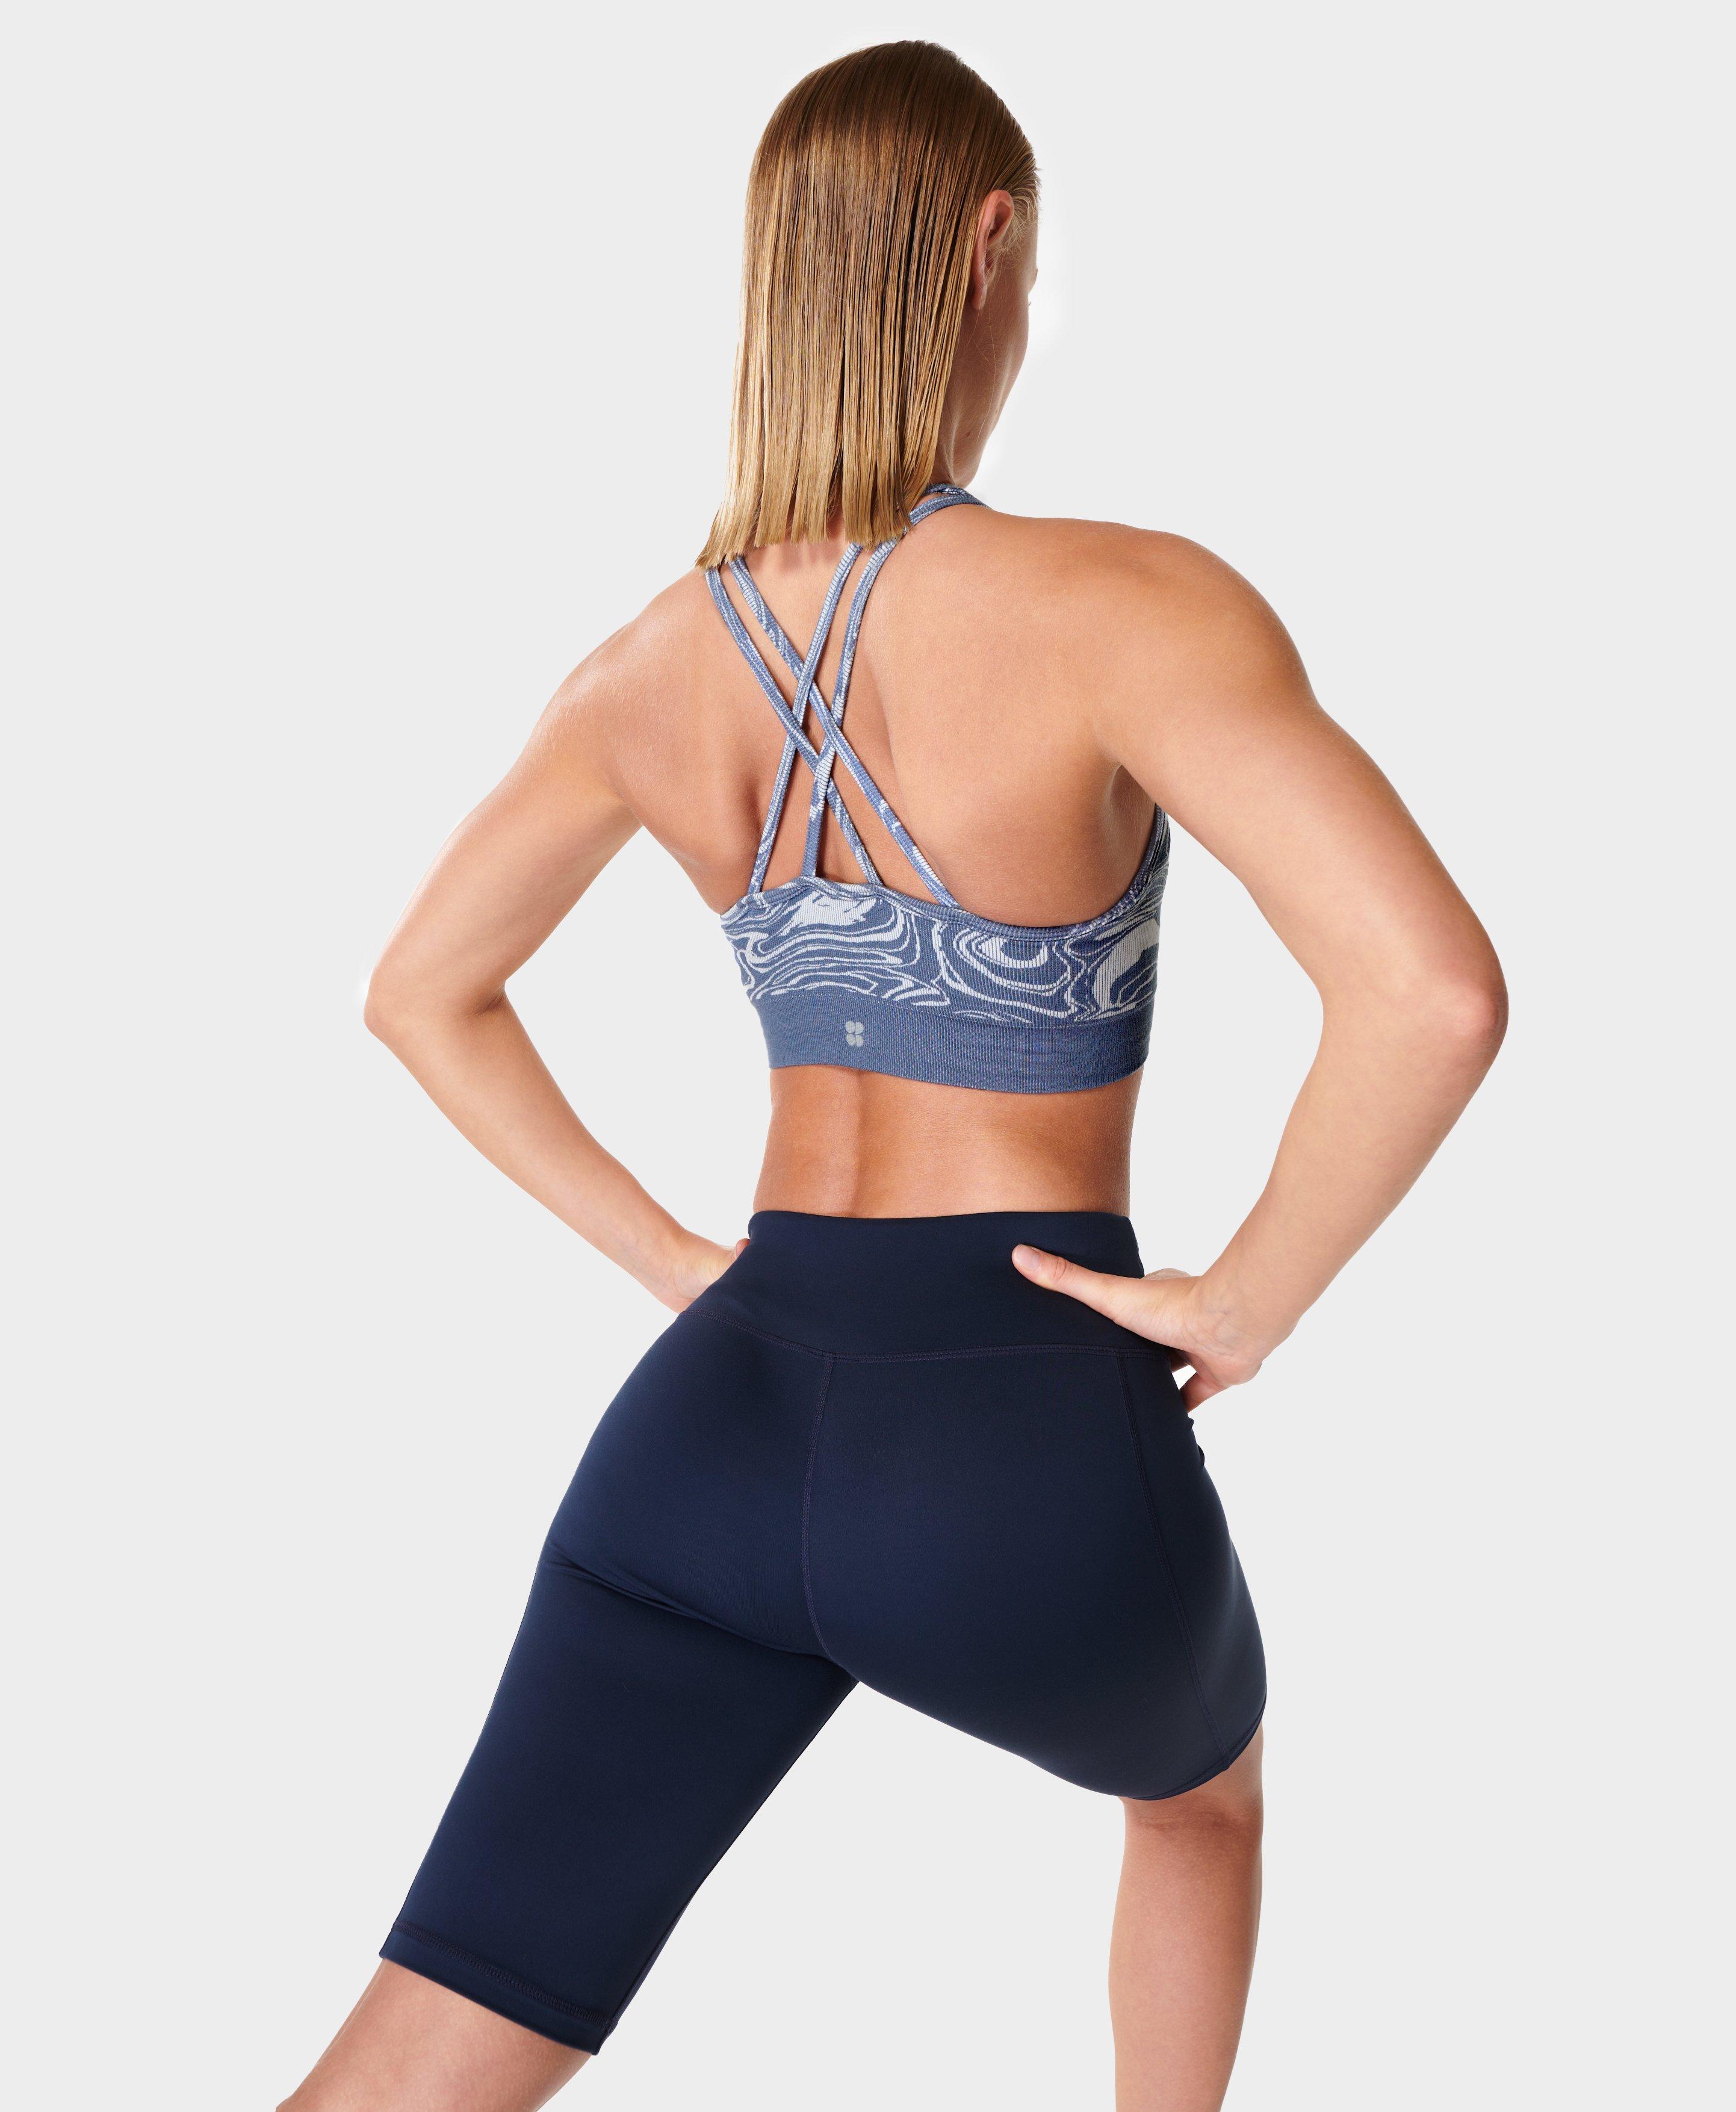 Buy Runhit Halter Neck Sports Bra for Women Comfy Stretchy Open Back Lounge  Bras with Medium Support, Grey Blue-9133, Medium at